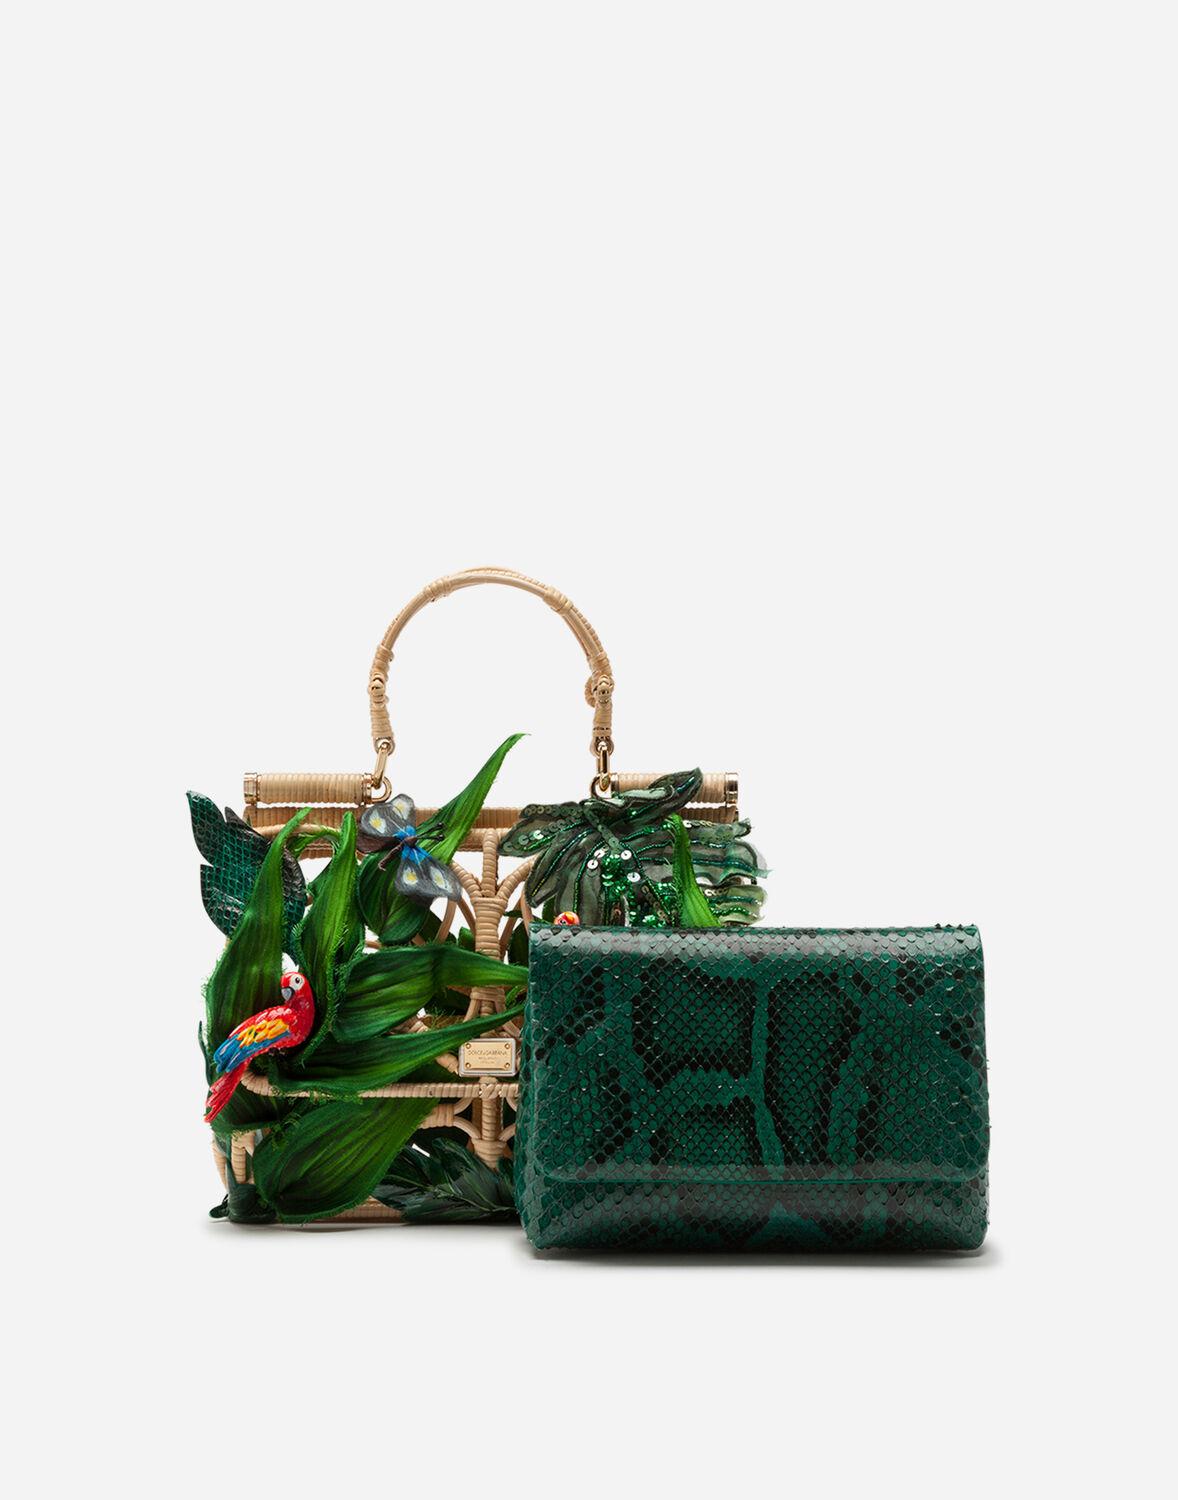 Dolce & Gabbana Leather Sicily Bag In Wicker With Jungle Appliqué in  Natural | Lyst